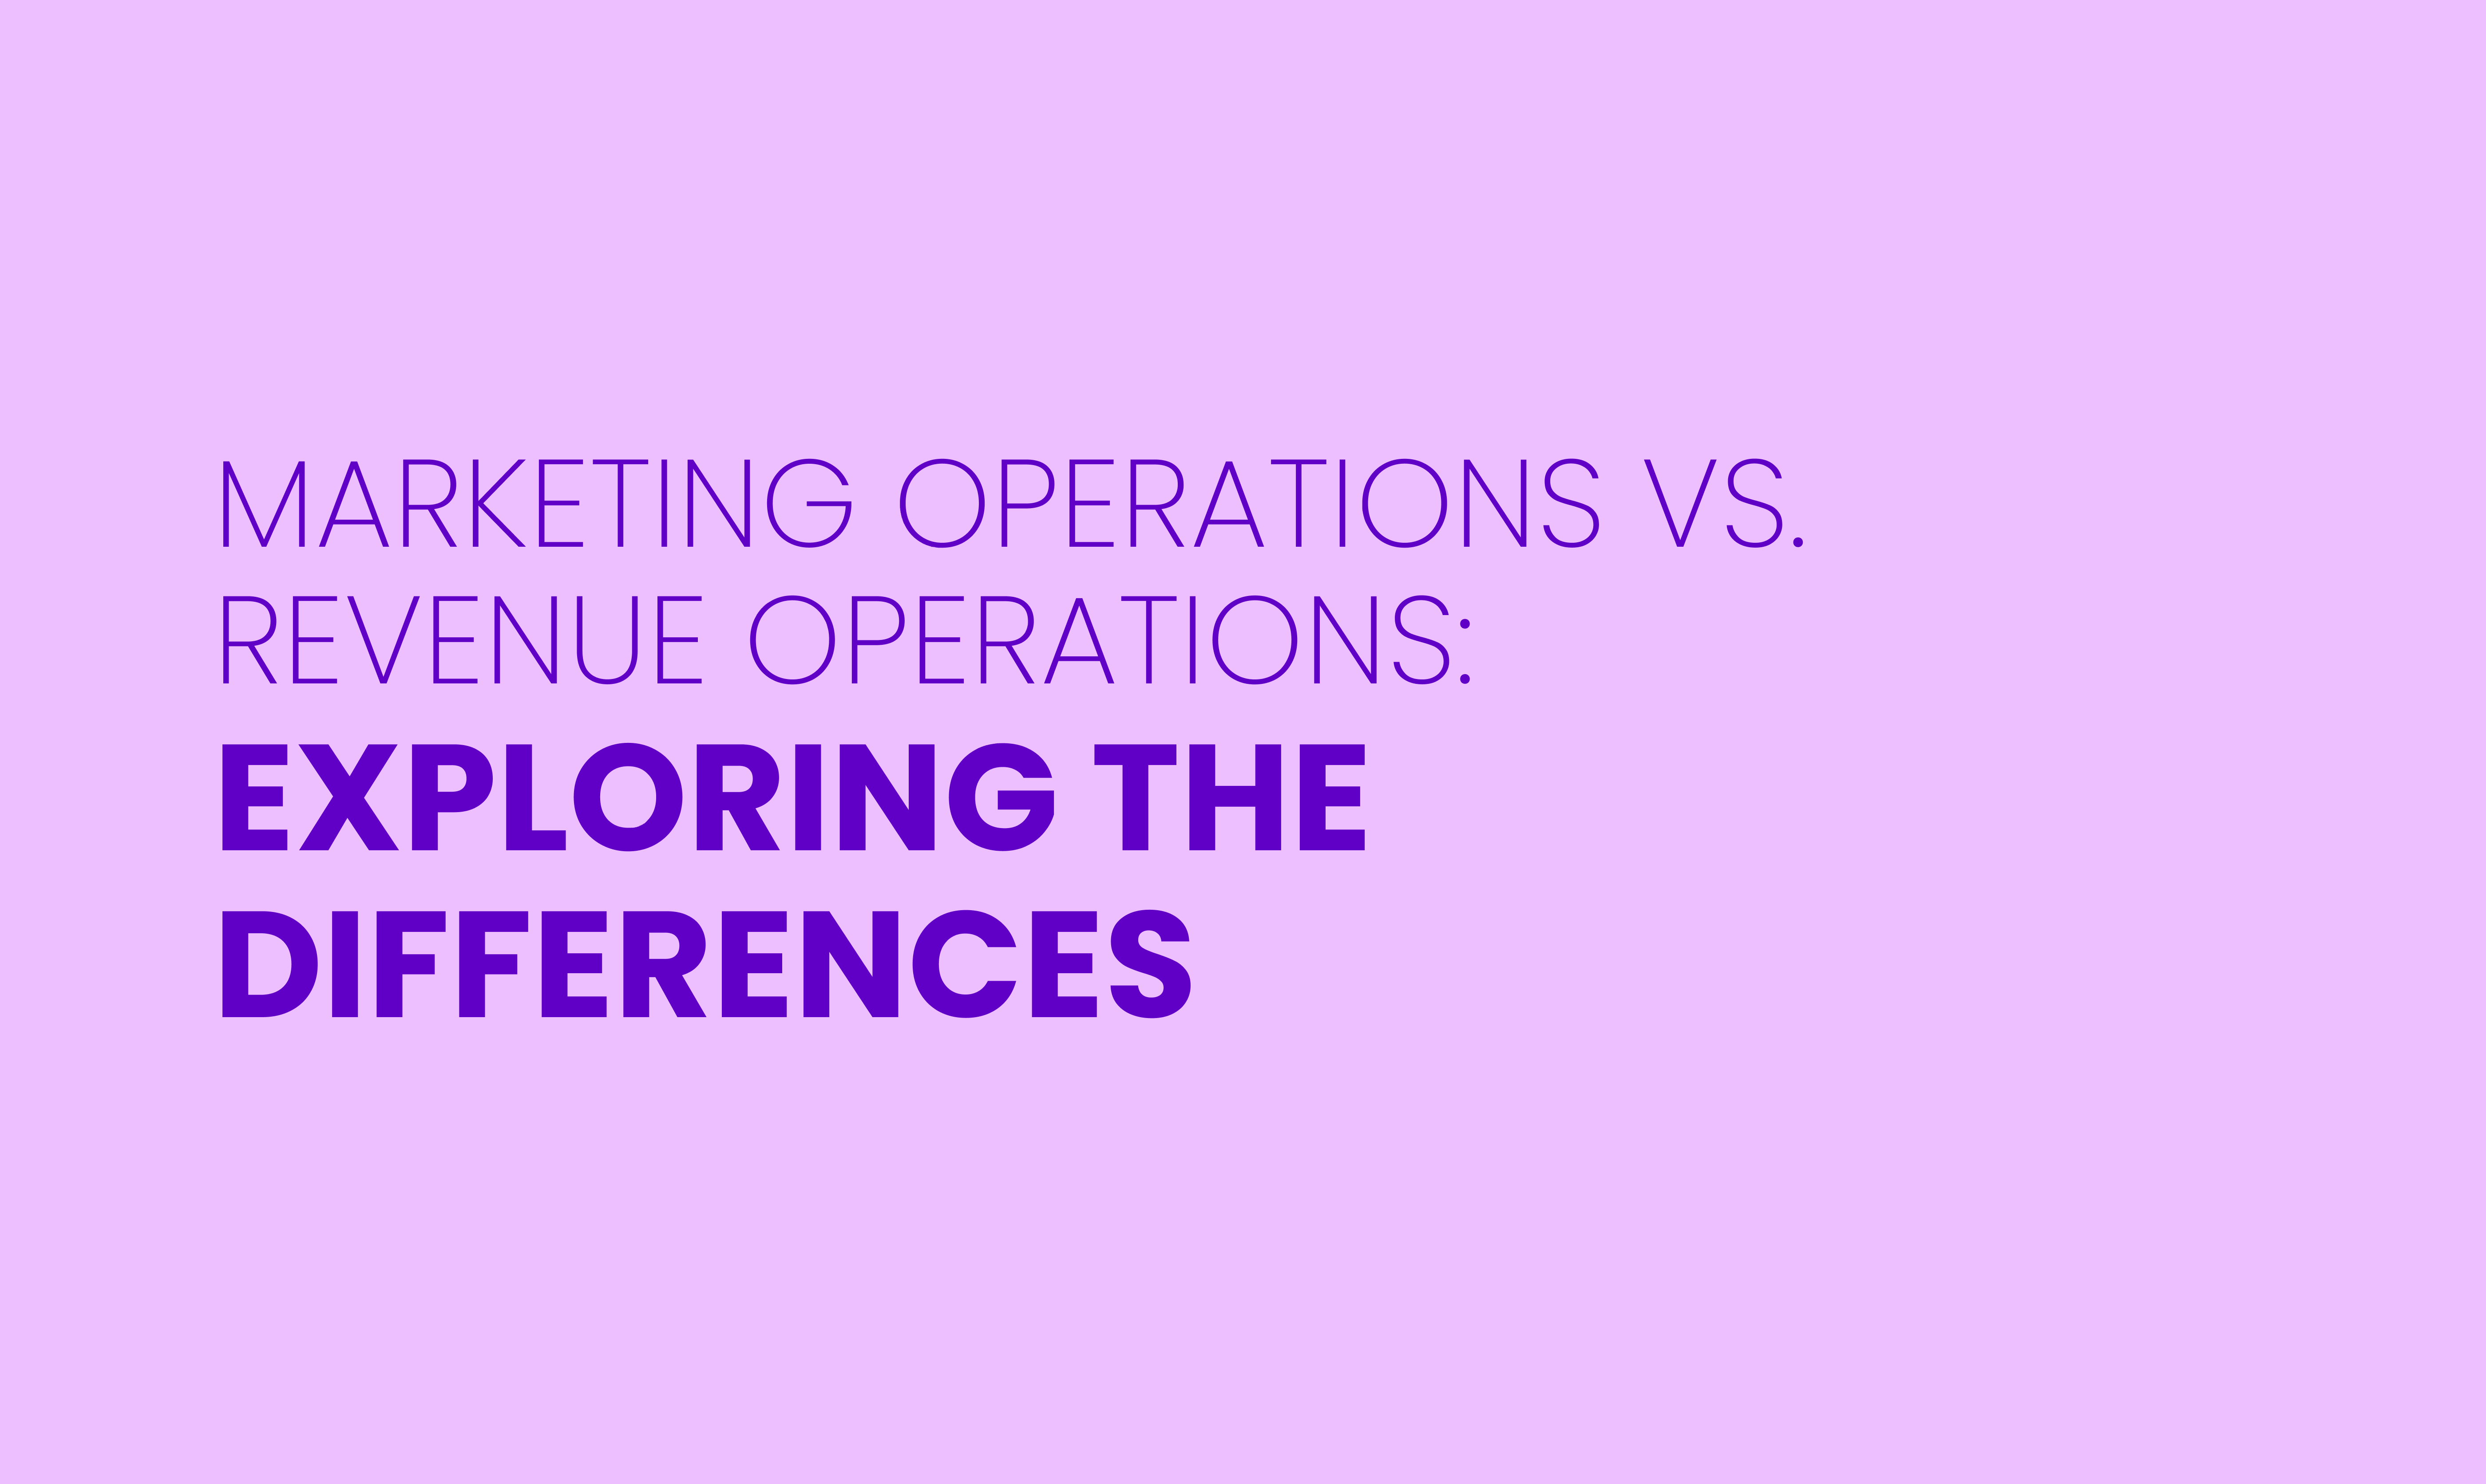 MARKETING OPERATIONS VS. REVENUE OPERATIONS:  EXPLORING THE DIFFERENCES